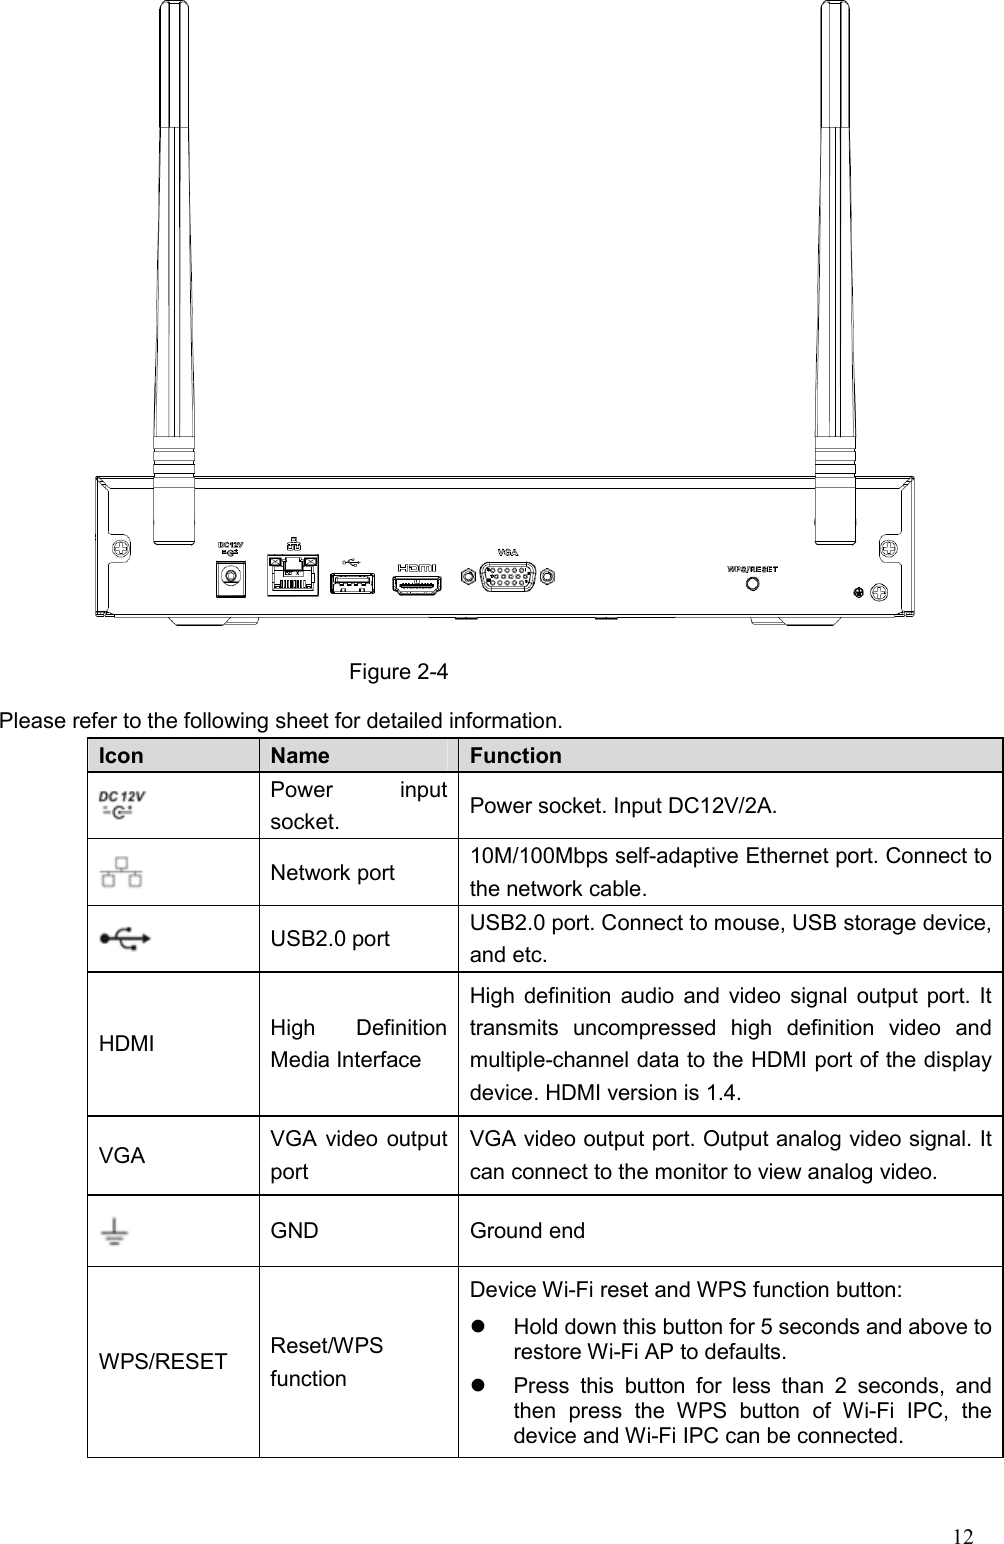 12   Figure 2-4 Please refer to the following sheet for detailed information. Icon    Name    Function    Power  input socket.    Power socket. Input DC12V/2A.  Network port    10M/100Mbps self-adaptive Ethernet port. Connect to the network cable.  USB2.0 port  USB2.0 port. Connect to mouse, USB storage device, and etc. HDMI  High  Definition Media Interface High definition audio and video signal output port. It transmits  uncompressed  high  definition  video  and multiple-channel data to the HDMI port of the display device. HDMI version is 1.4. VGA  VGA video output port VGA video output port. Output analog video signal. It can connect to the monitor to view analog video.  GND  Ground end   WPS/RESET  Reset/WPS function Device Wi-Fi reset and WPS function button:   Hold down this button for 5 seconds and above to restore Wi-Fi AP to defaults.     Press  this  button  for  less  than  2  seconds,  and then  press  the  WPS  button  of  Wi-Fi  IPC,  the device and Wi-Fi IPC can be connected. 